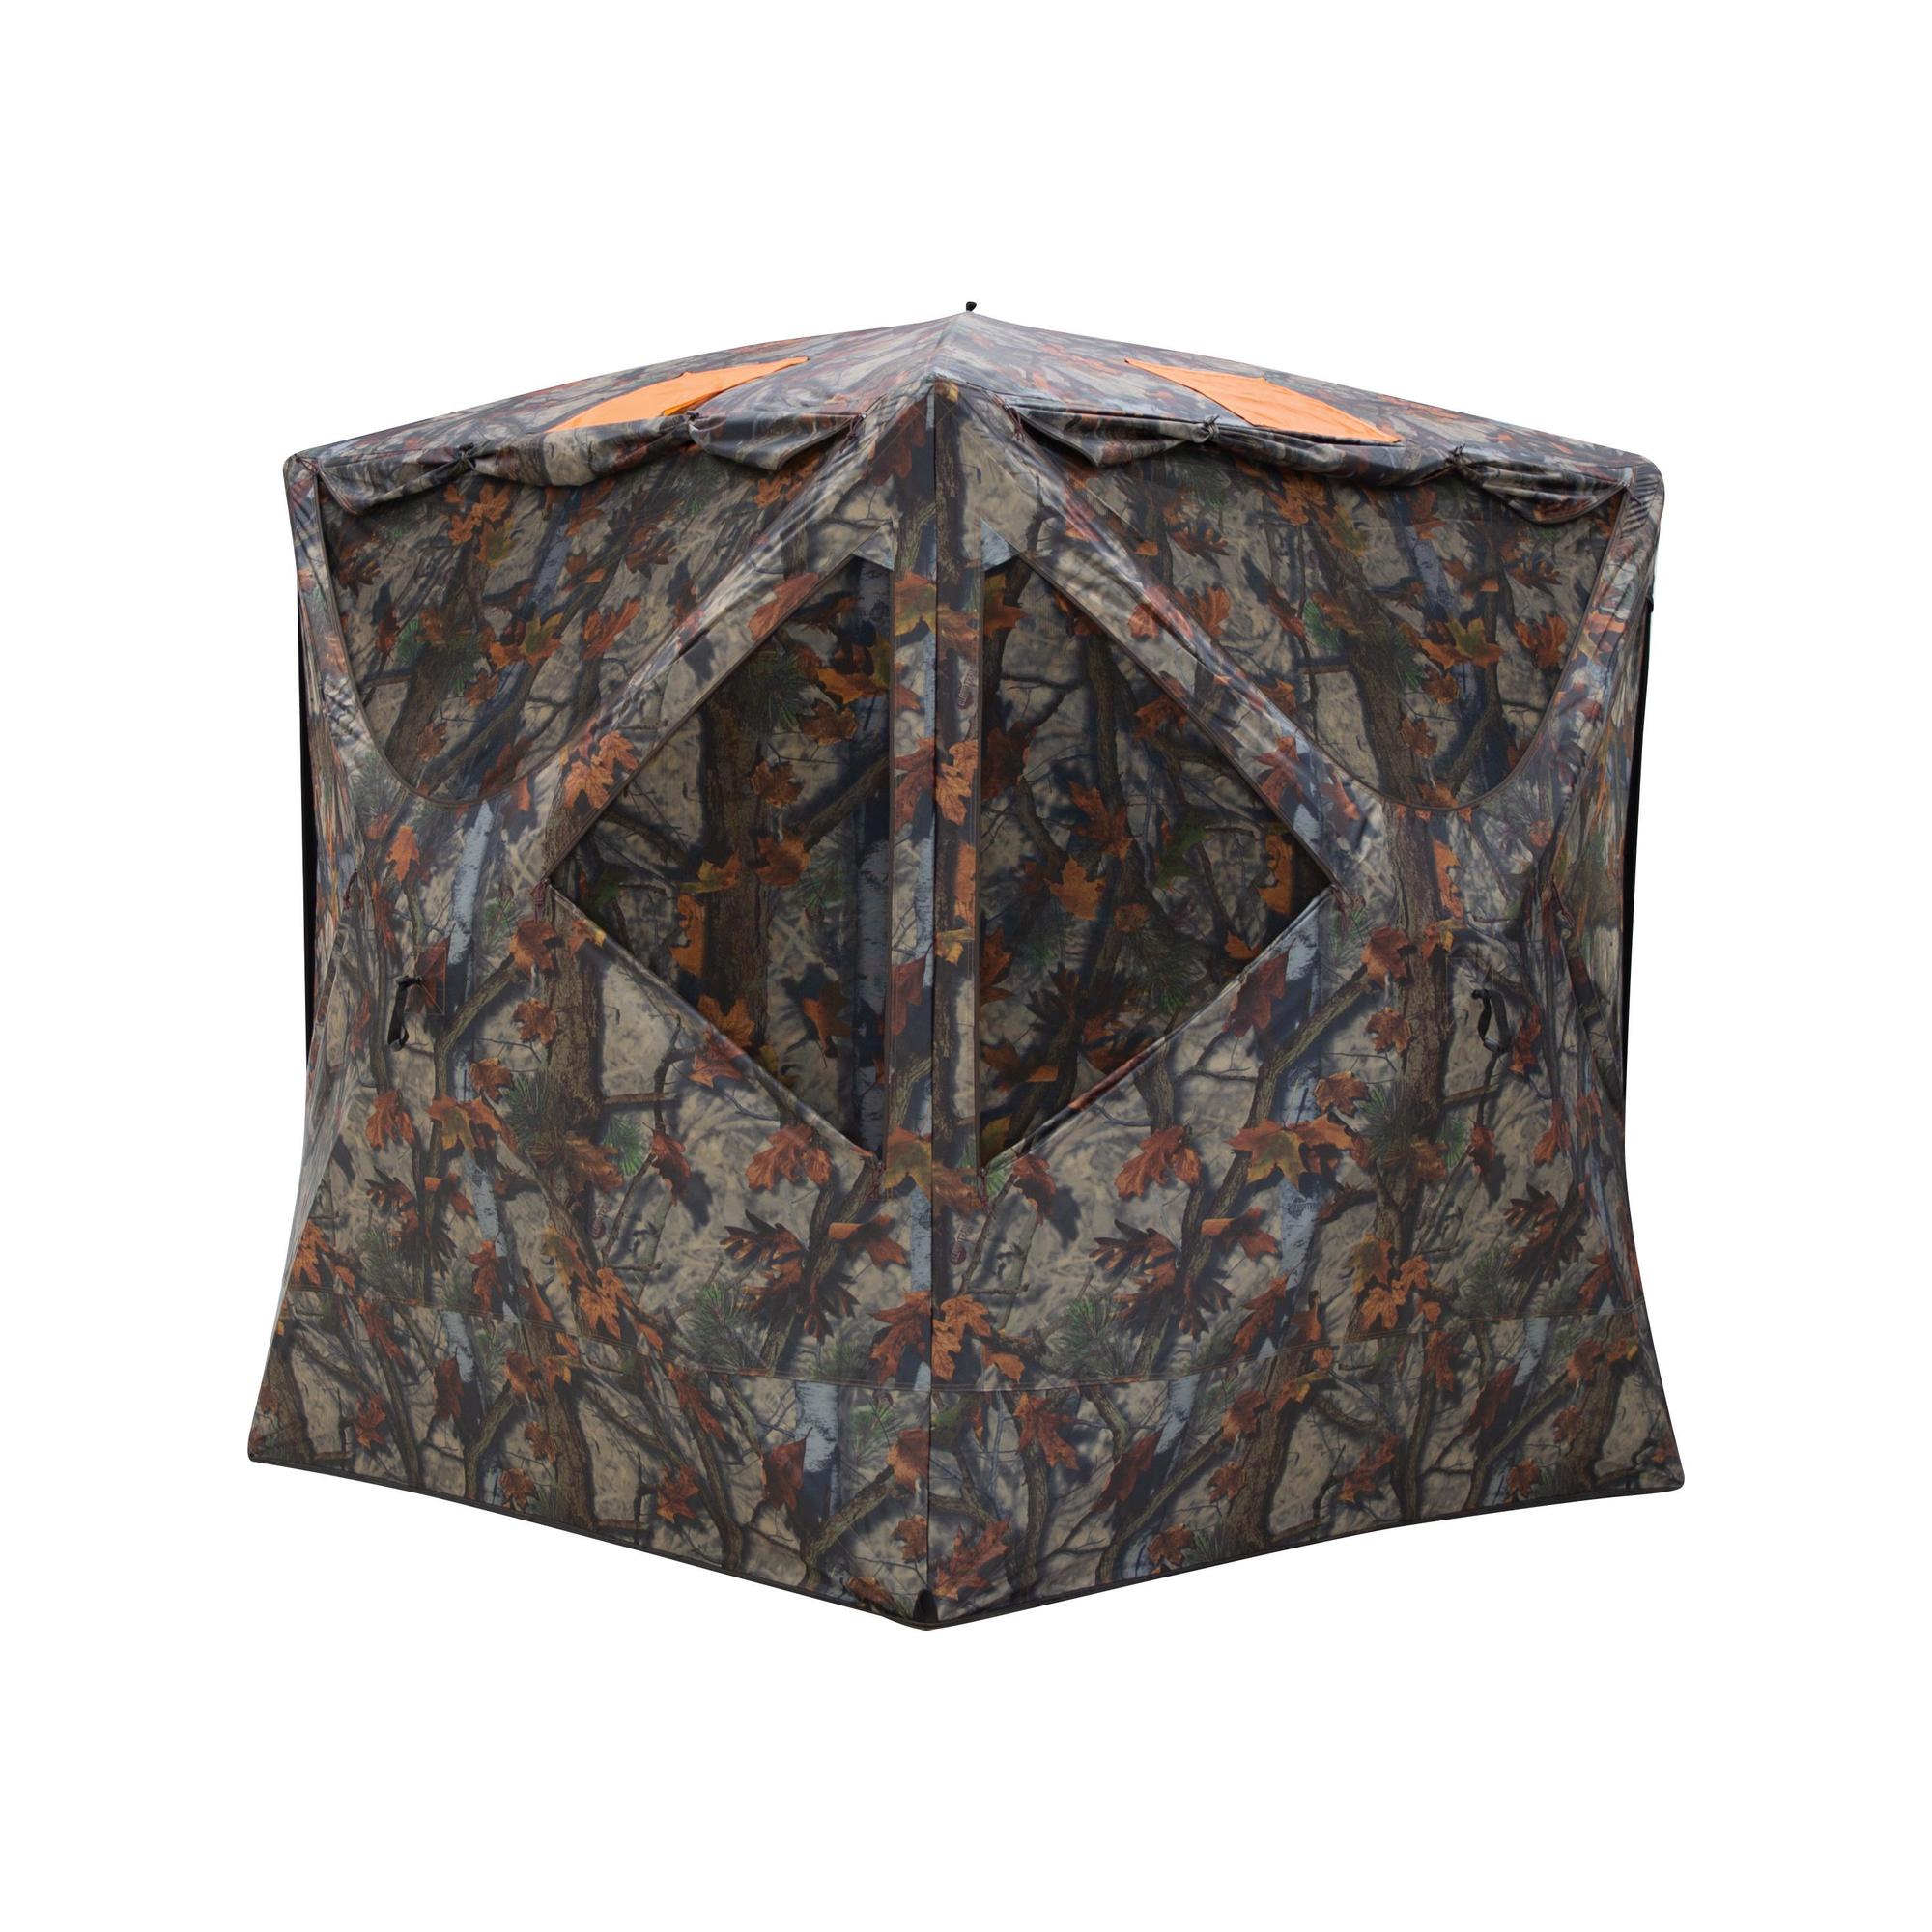 Barronett Blinds, Tag Out Hunting Blind, 3-Person Capacity, Color Camouflage, Material Polyester, Model TA350BT